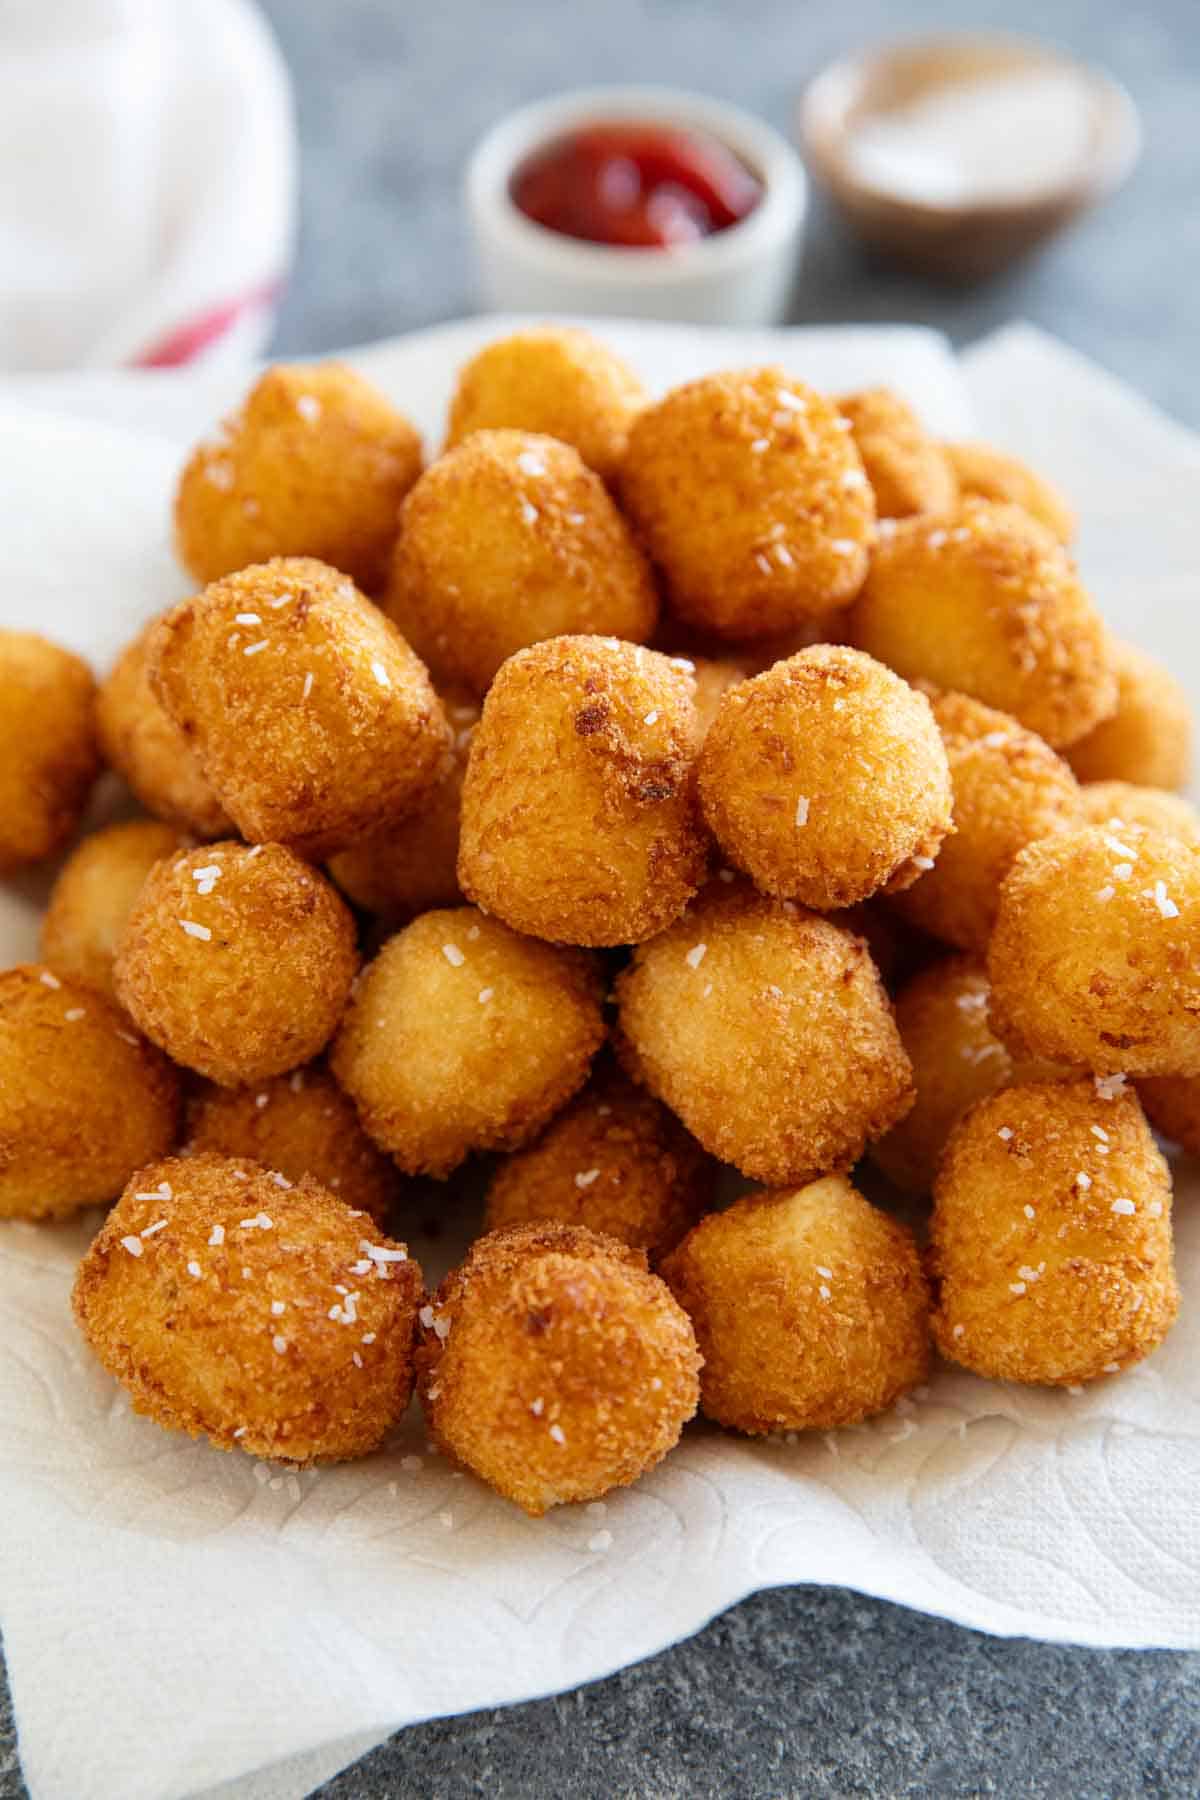 Freshly fried tater tots on paper towel lined plate.